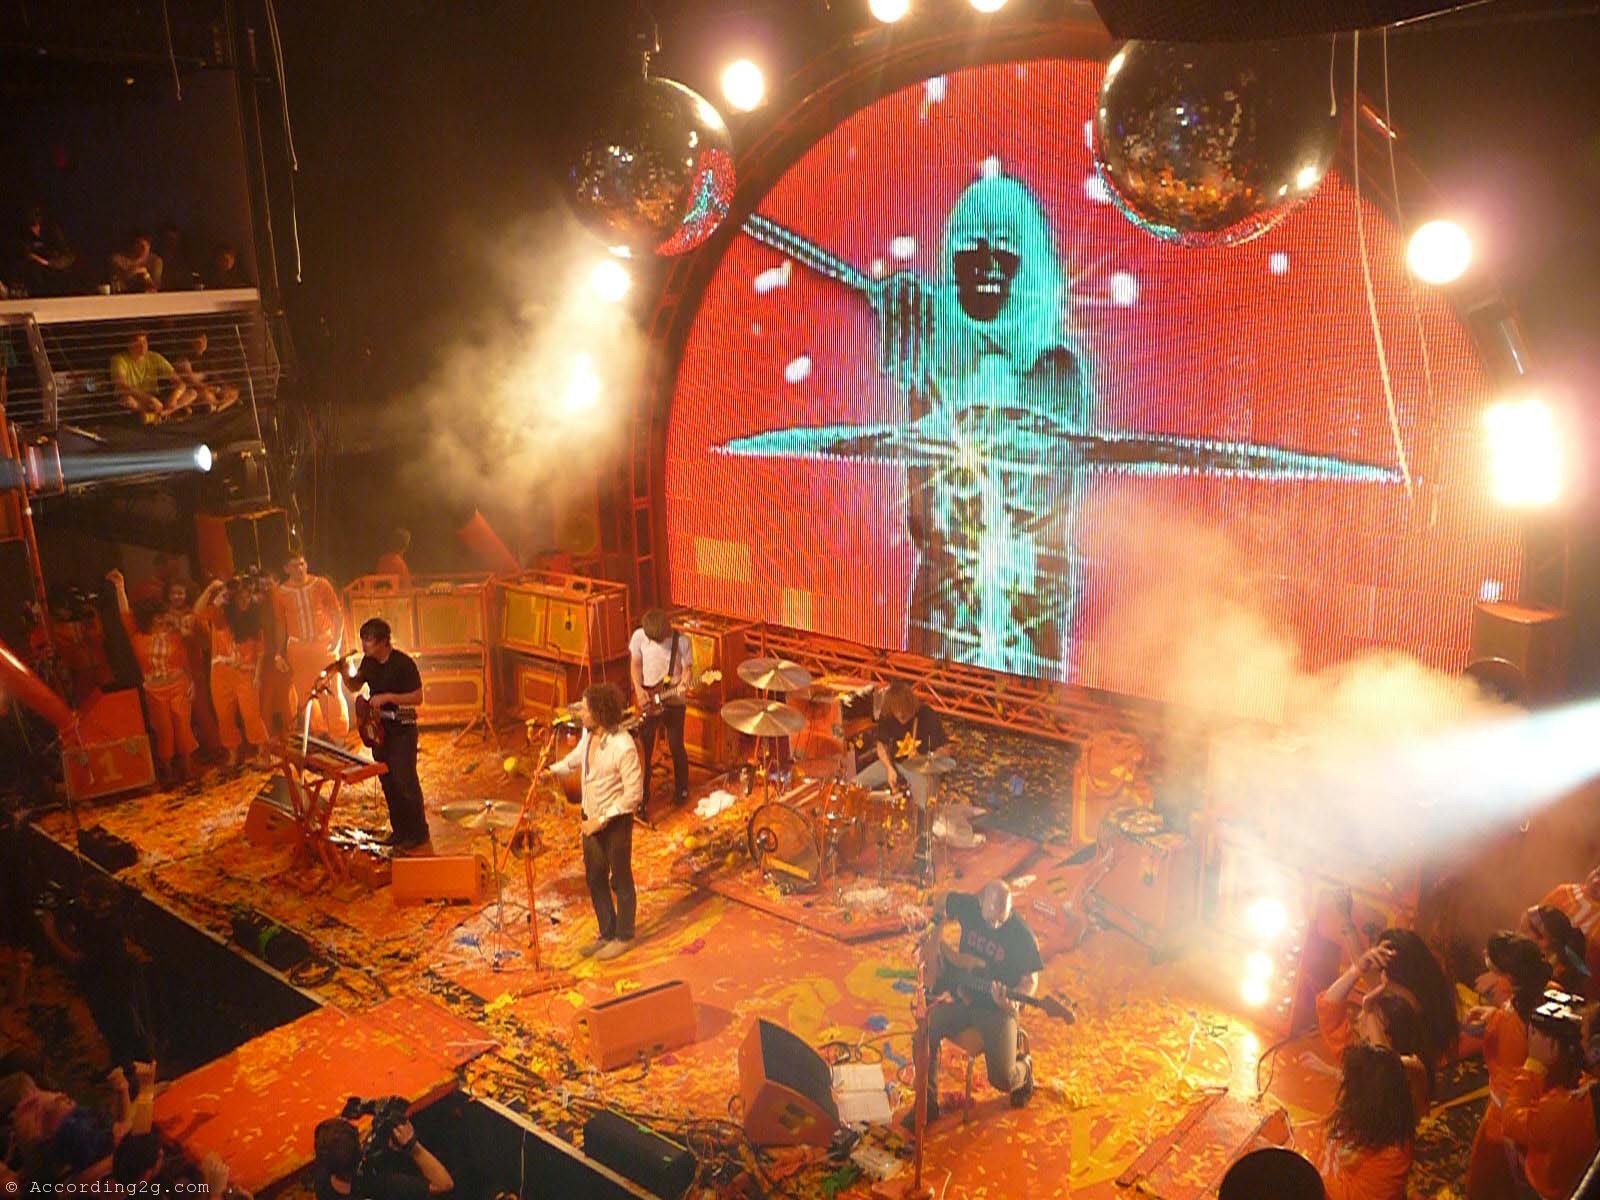 More Photos of The Flaming Lips! | According 2 G